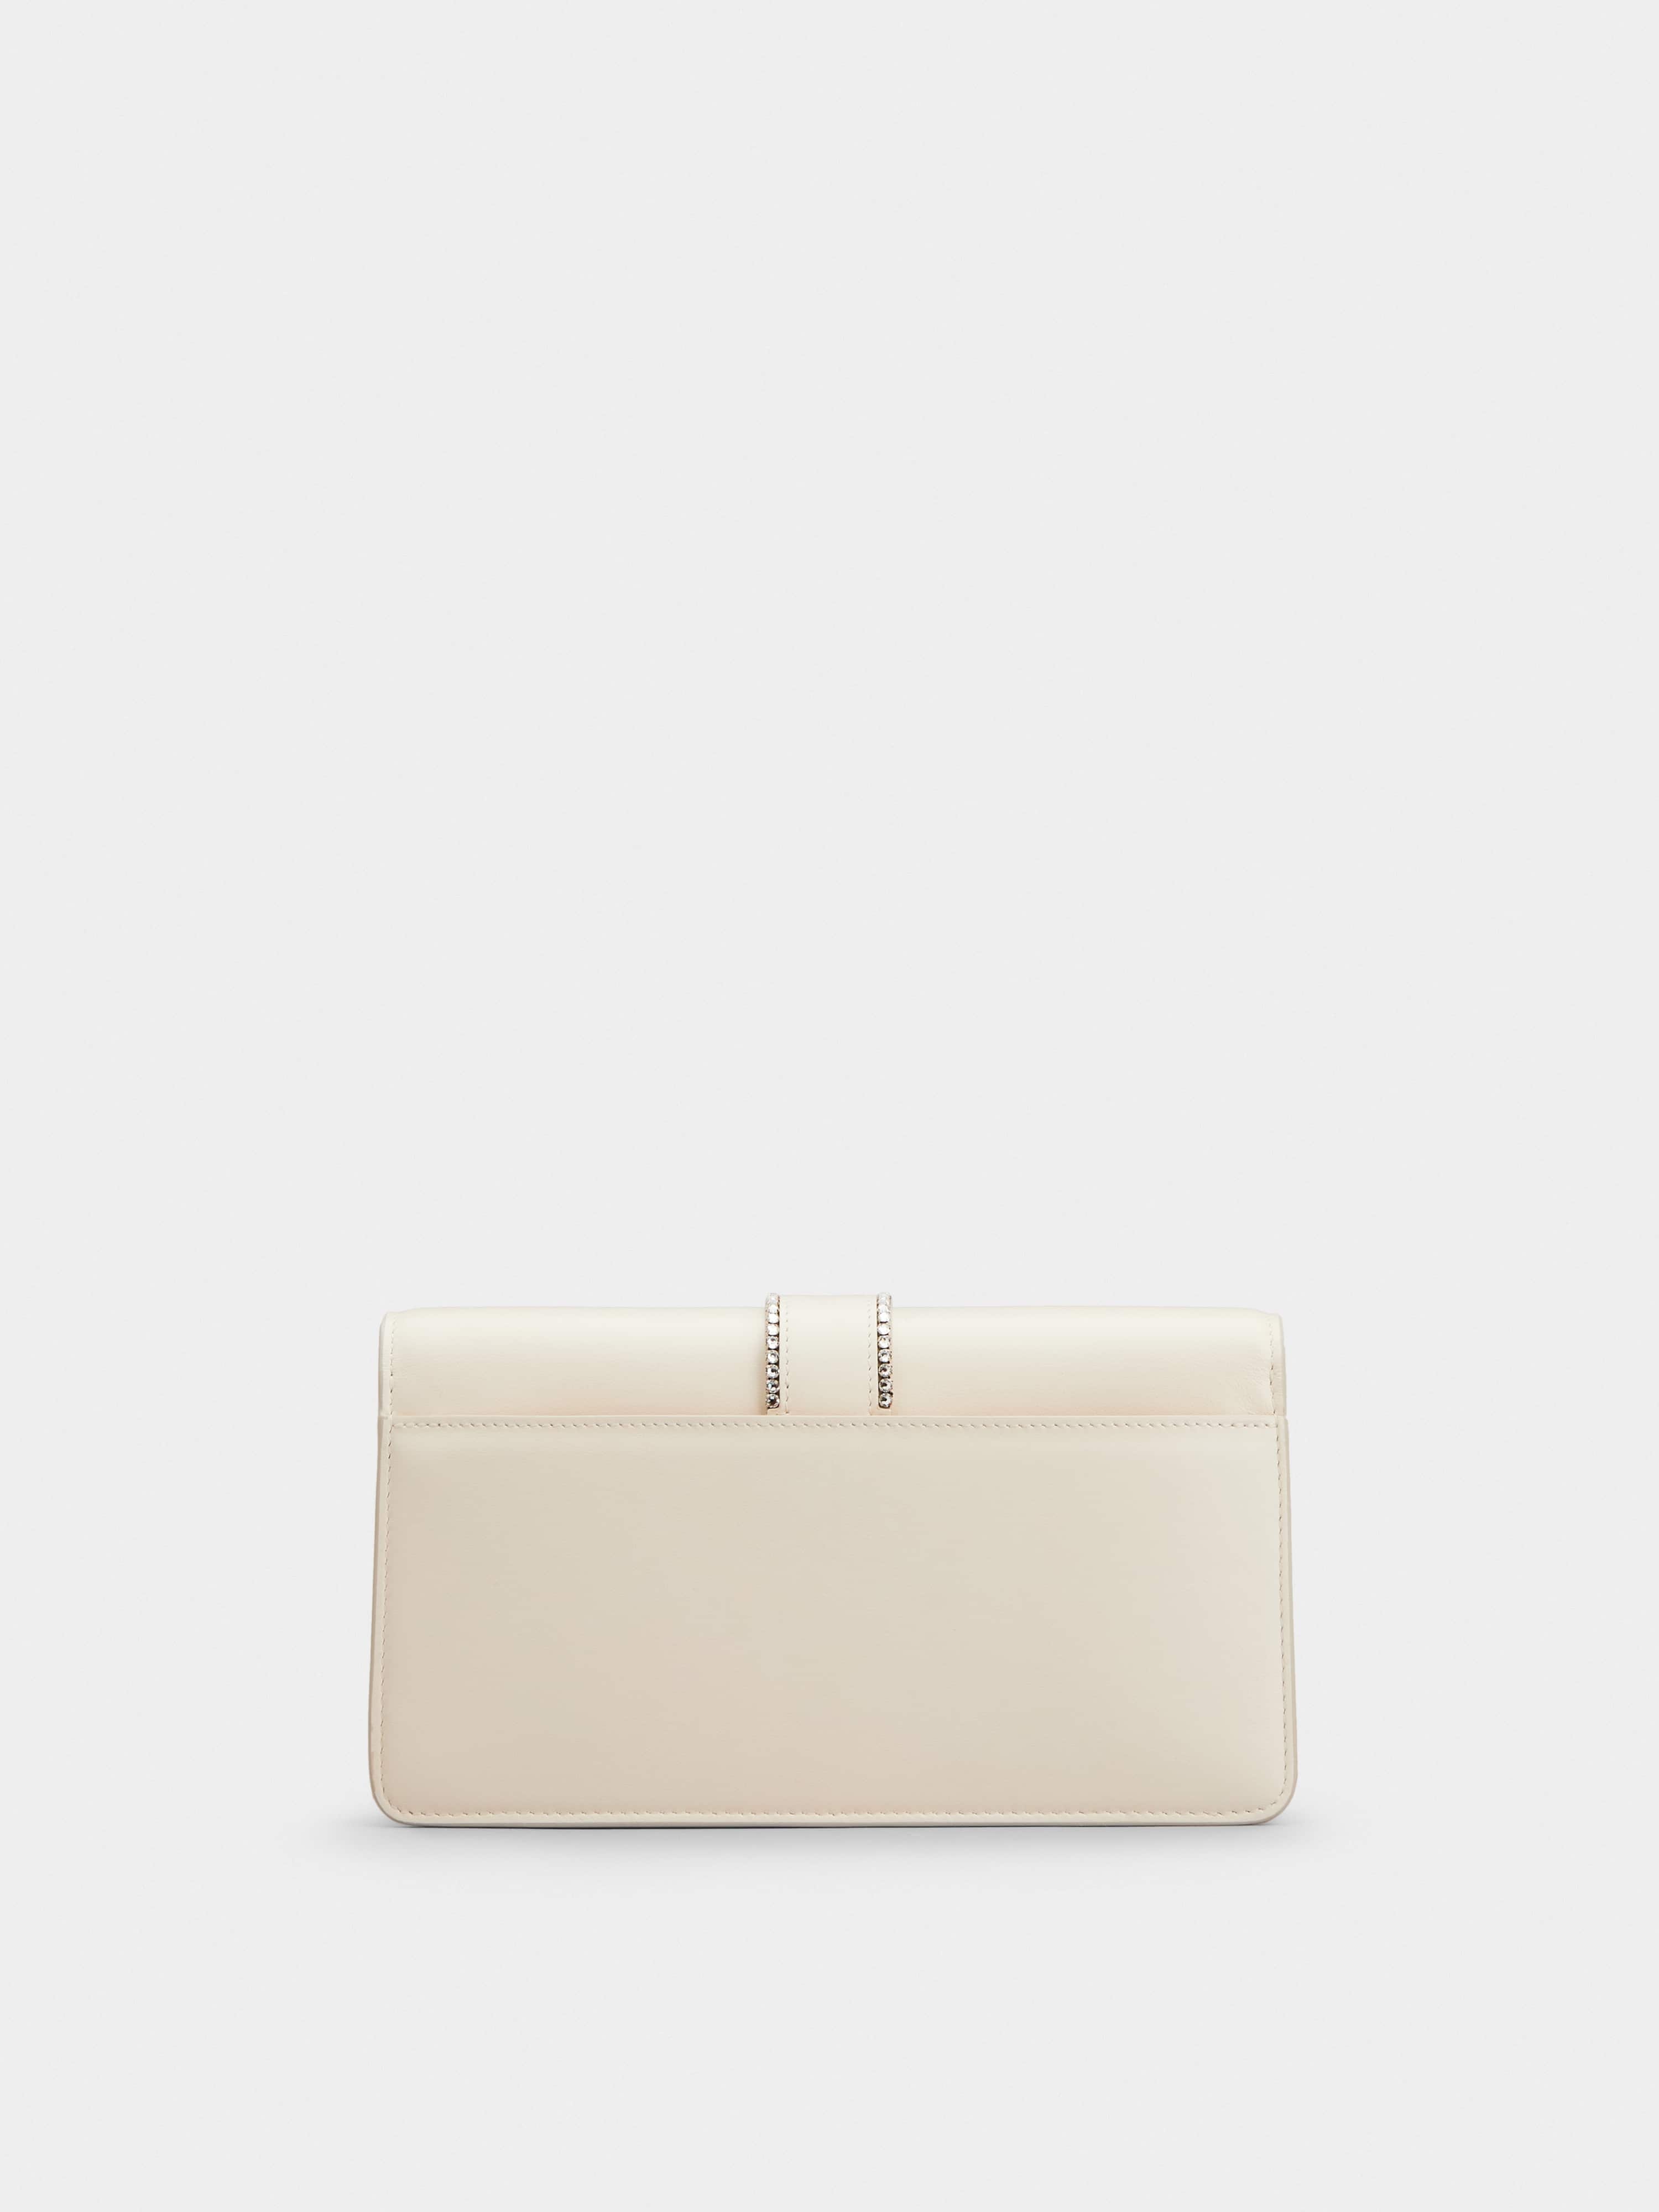 Miss Vivier Strass Buckle Clutch in Leather - 5